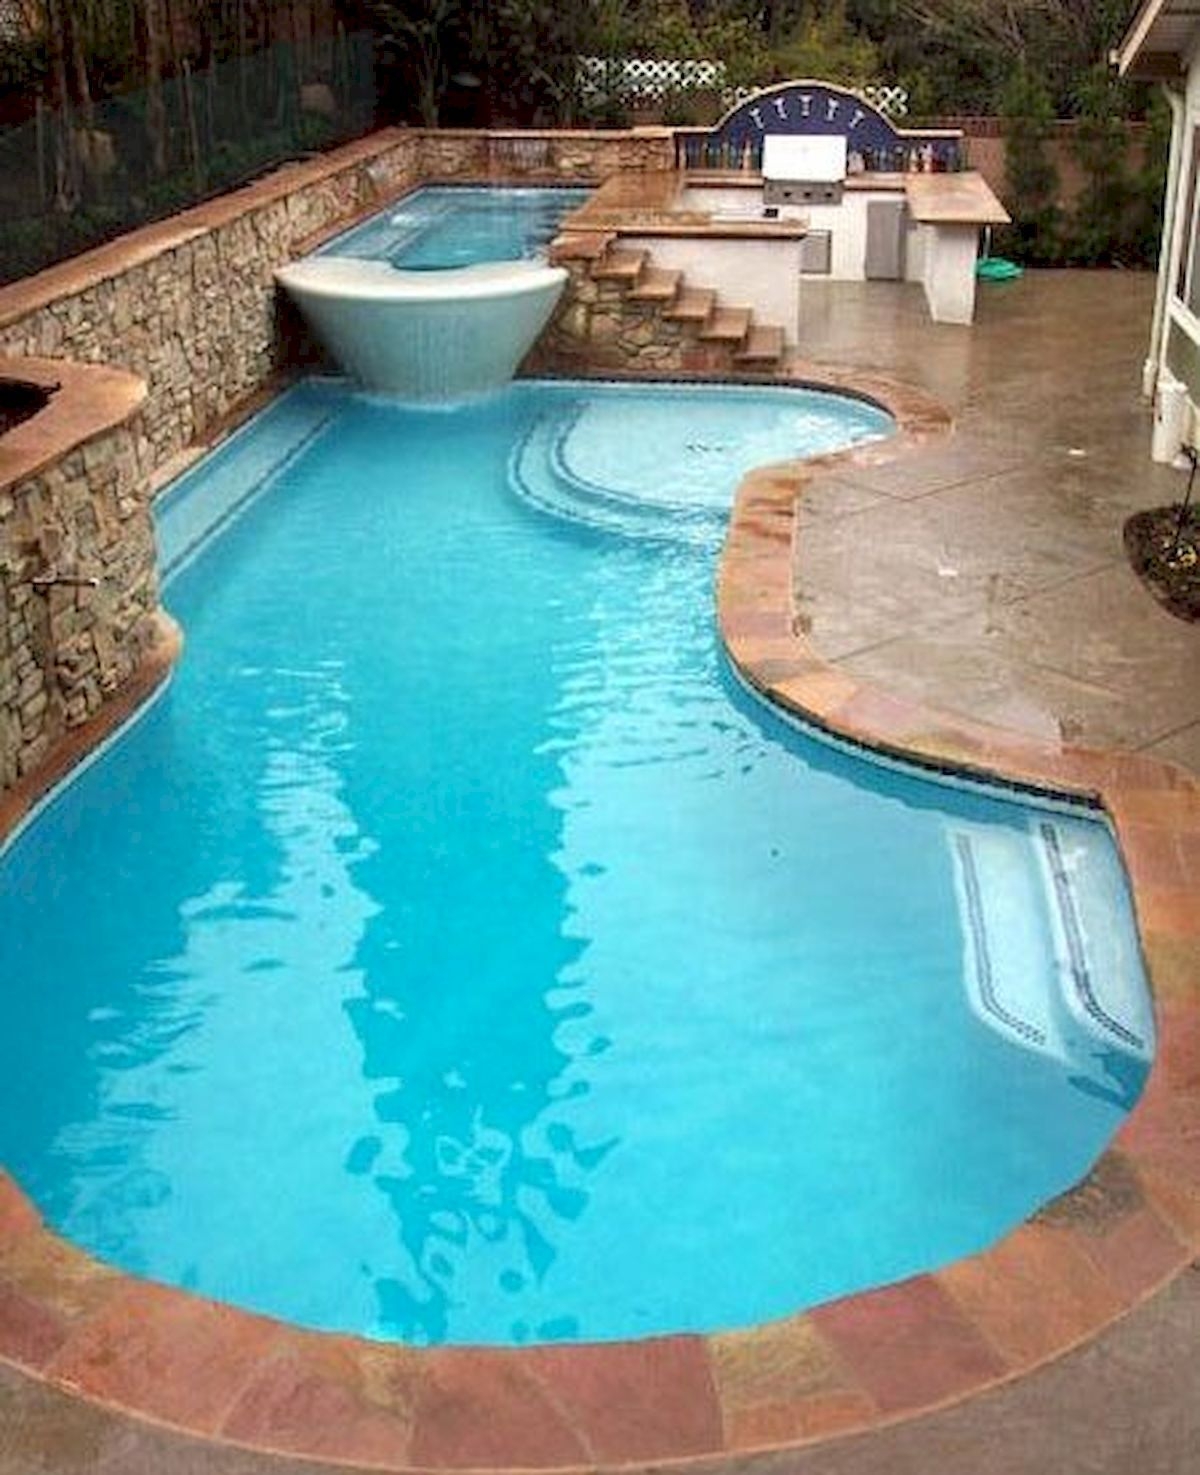 Pool with hot tub 19